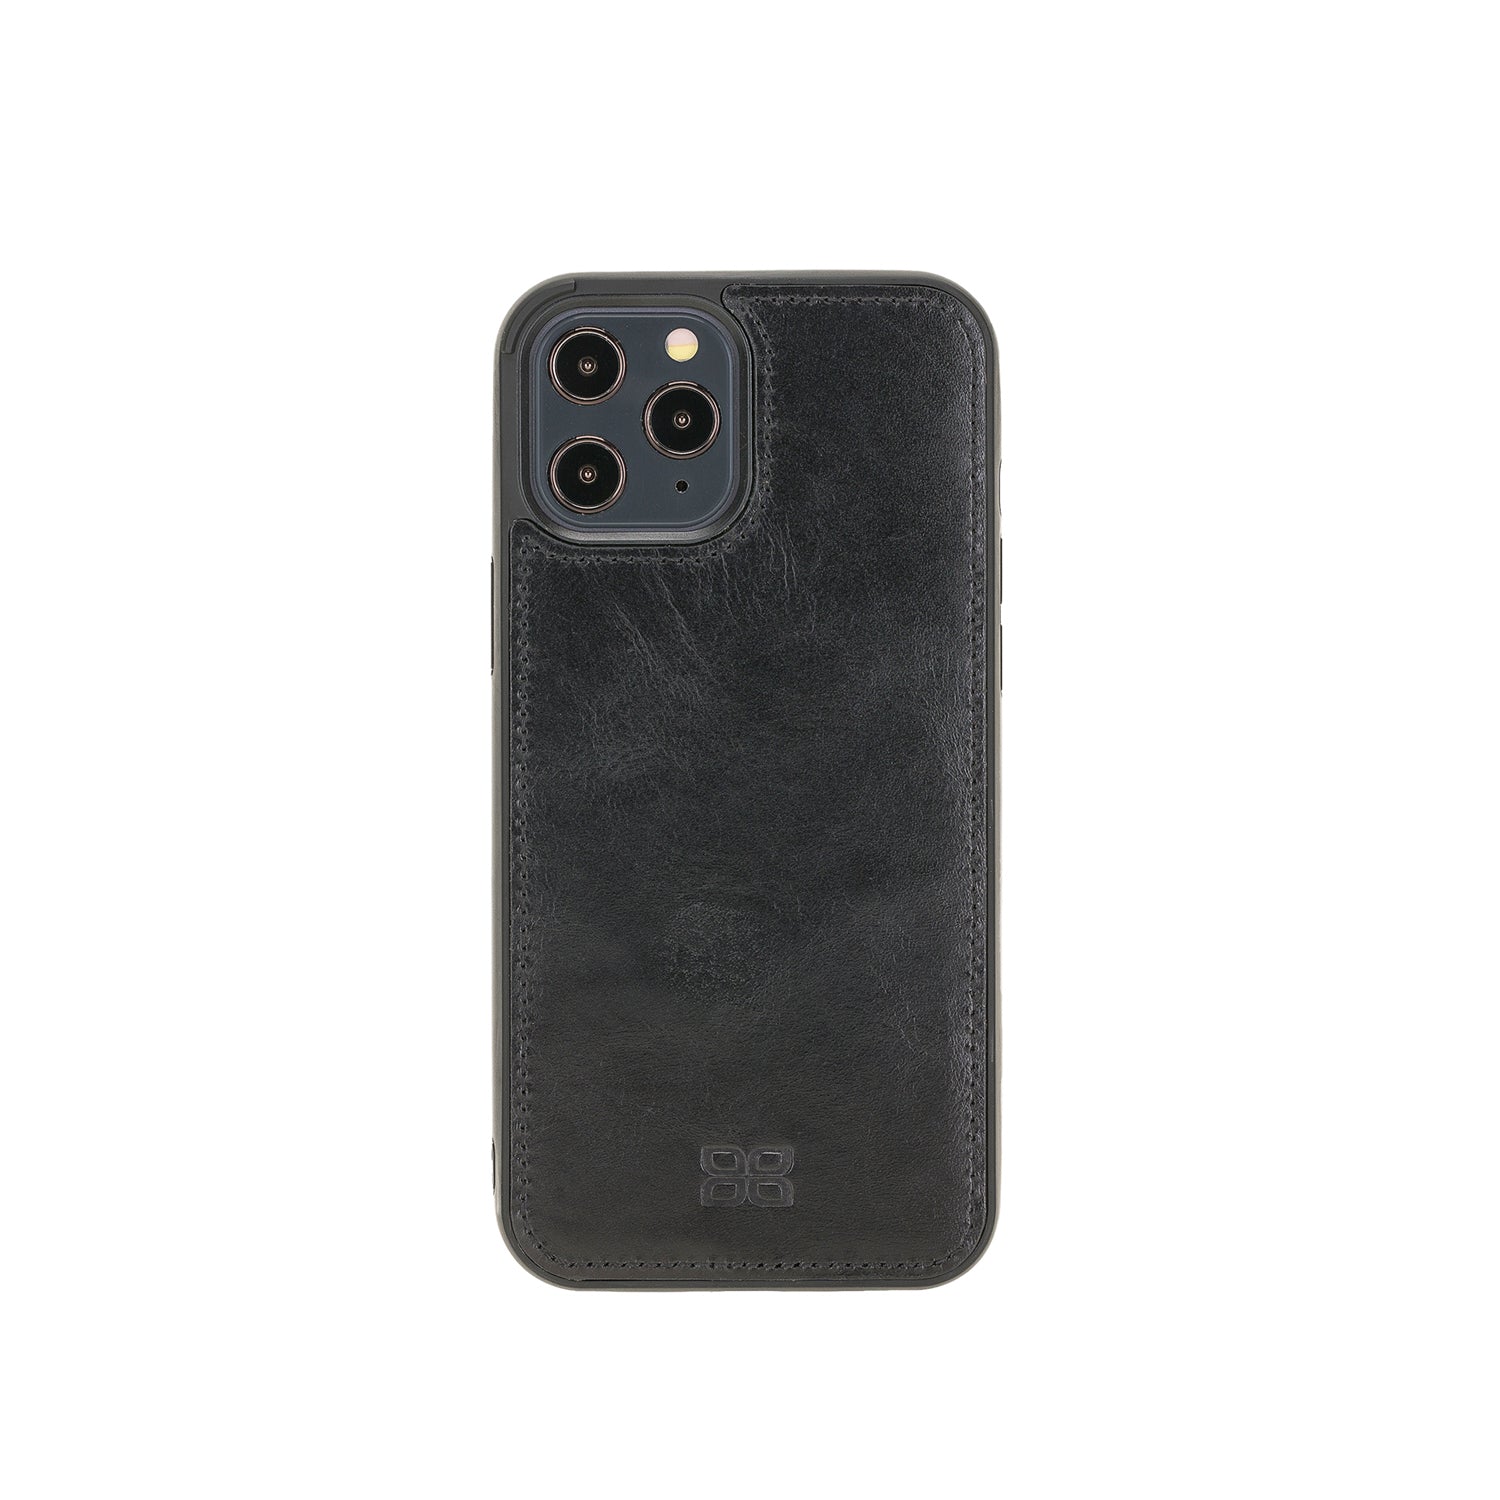 Flex Cover Leather Back Case for iPhone 12 Pro (6.1") - BLACK - saracleather